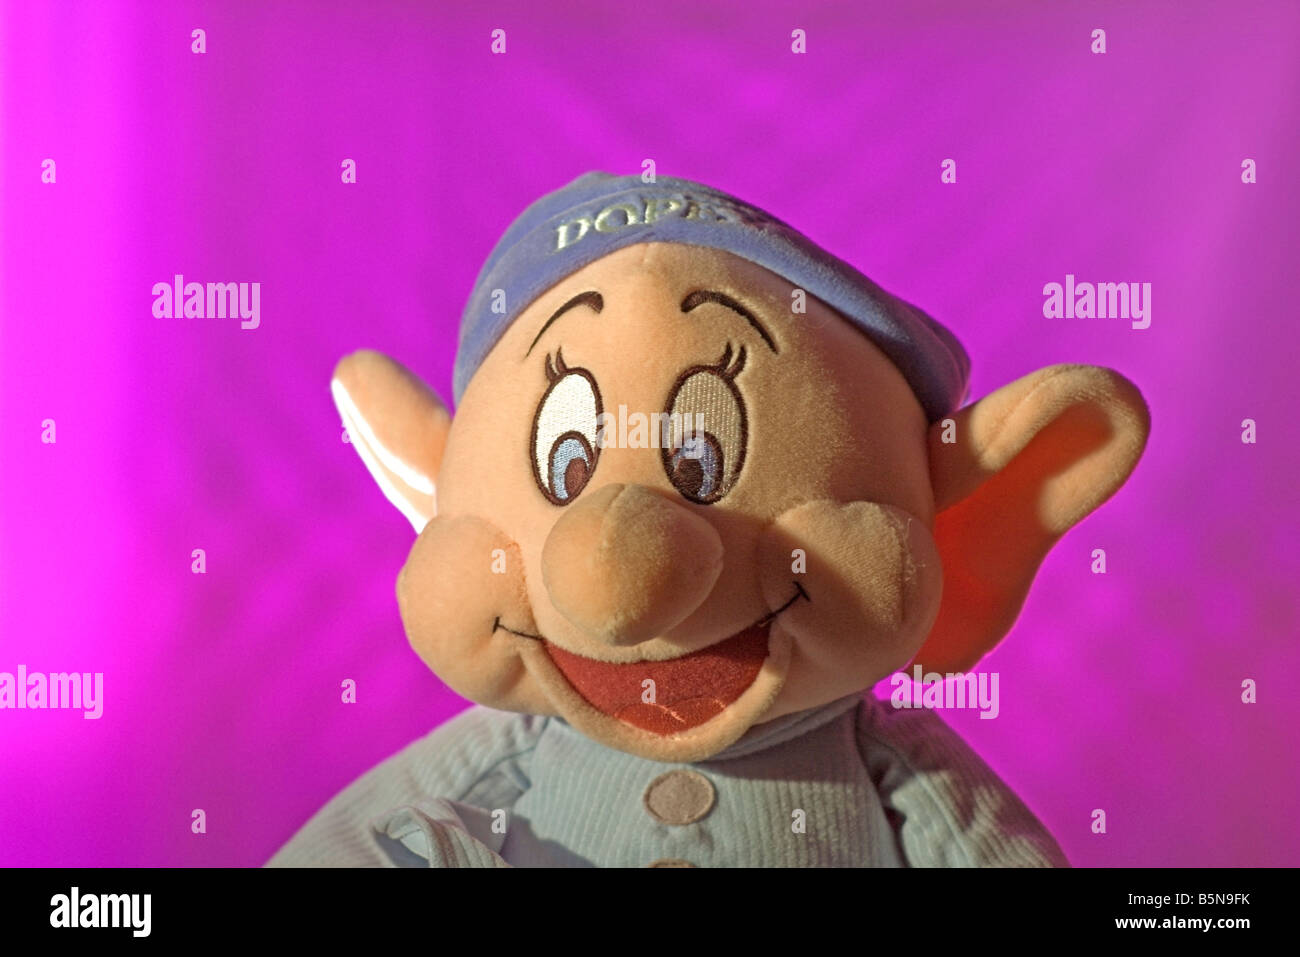 A toy of Dopey from the Seven Dwarves, lit as a portrait Stock Photo